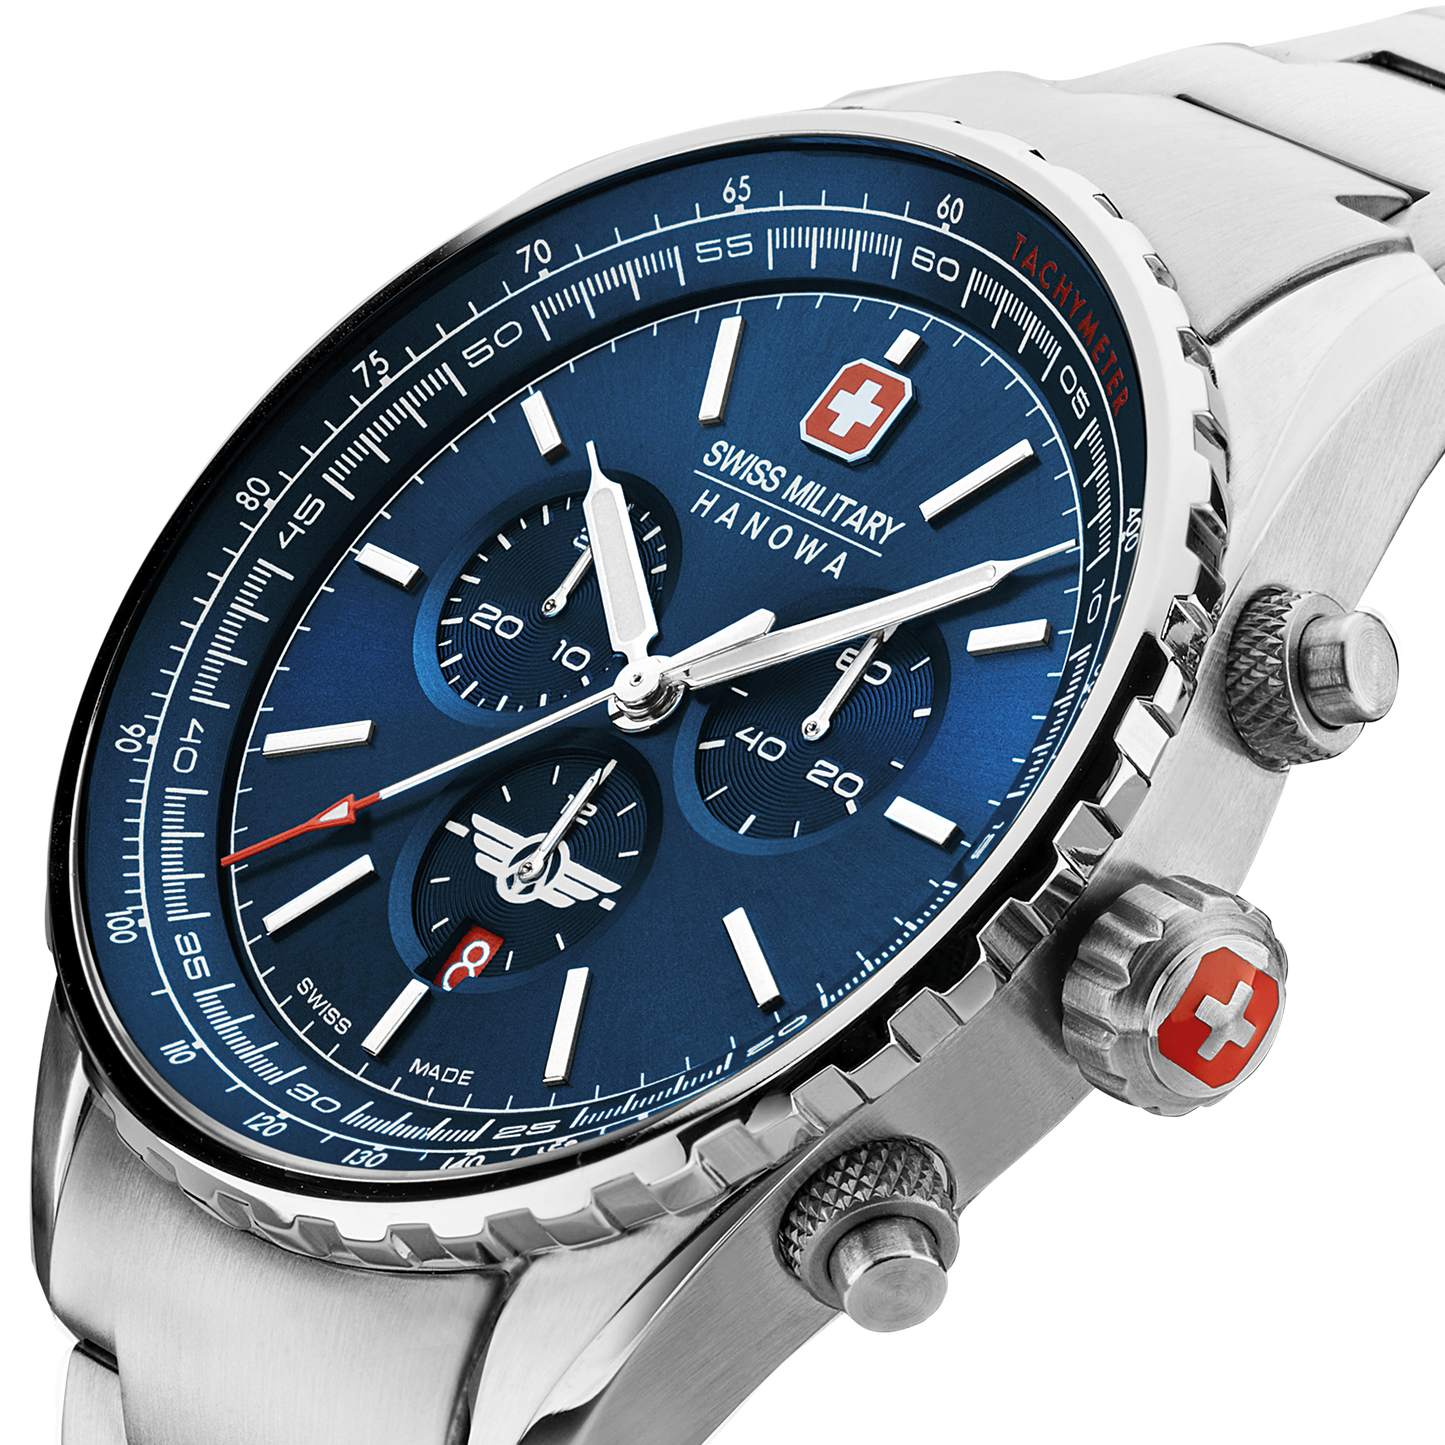 Swiss Military Hanowa Afterburn Chrono. Stainless steel case. Blue dial, Stainless steel bracelet. Close up  image.